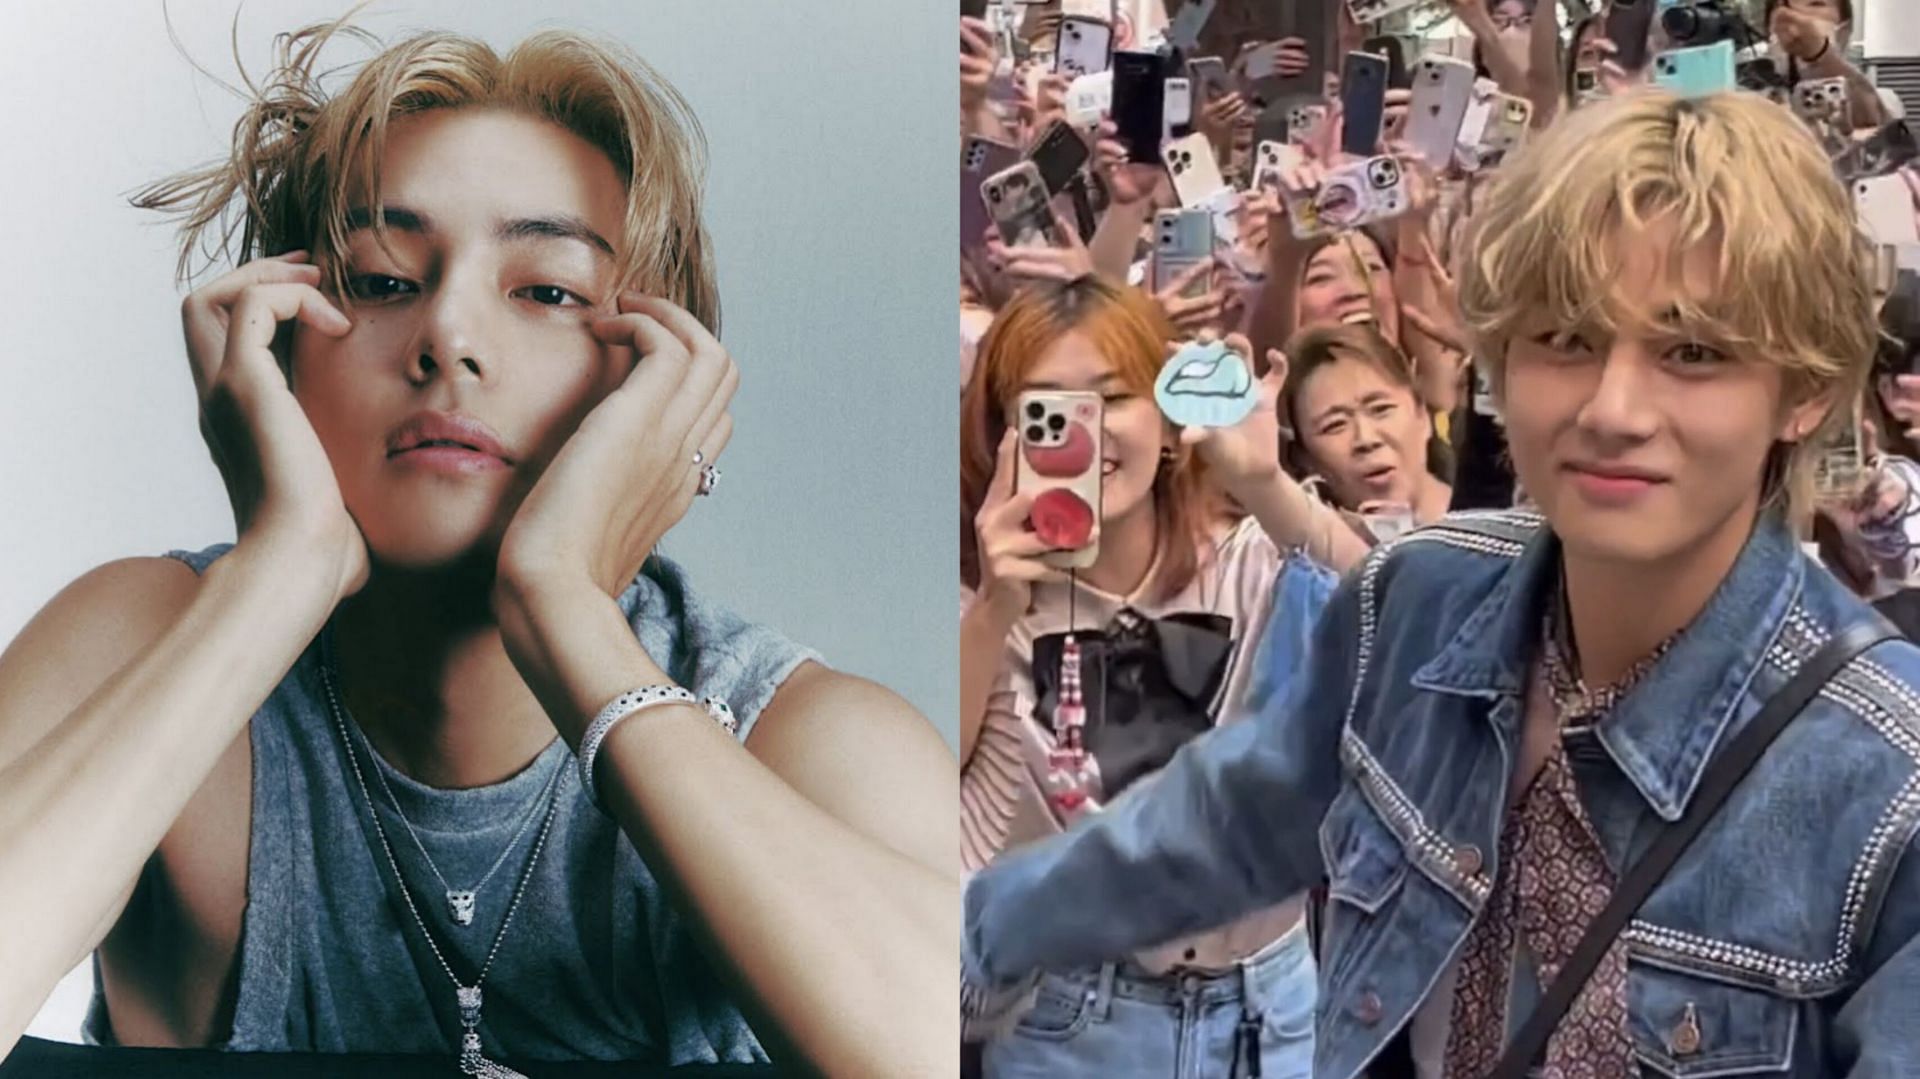 Kim Tae-hyung Impact: Fans rejoice as the singer increases CELINE's brand  value